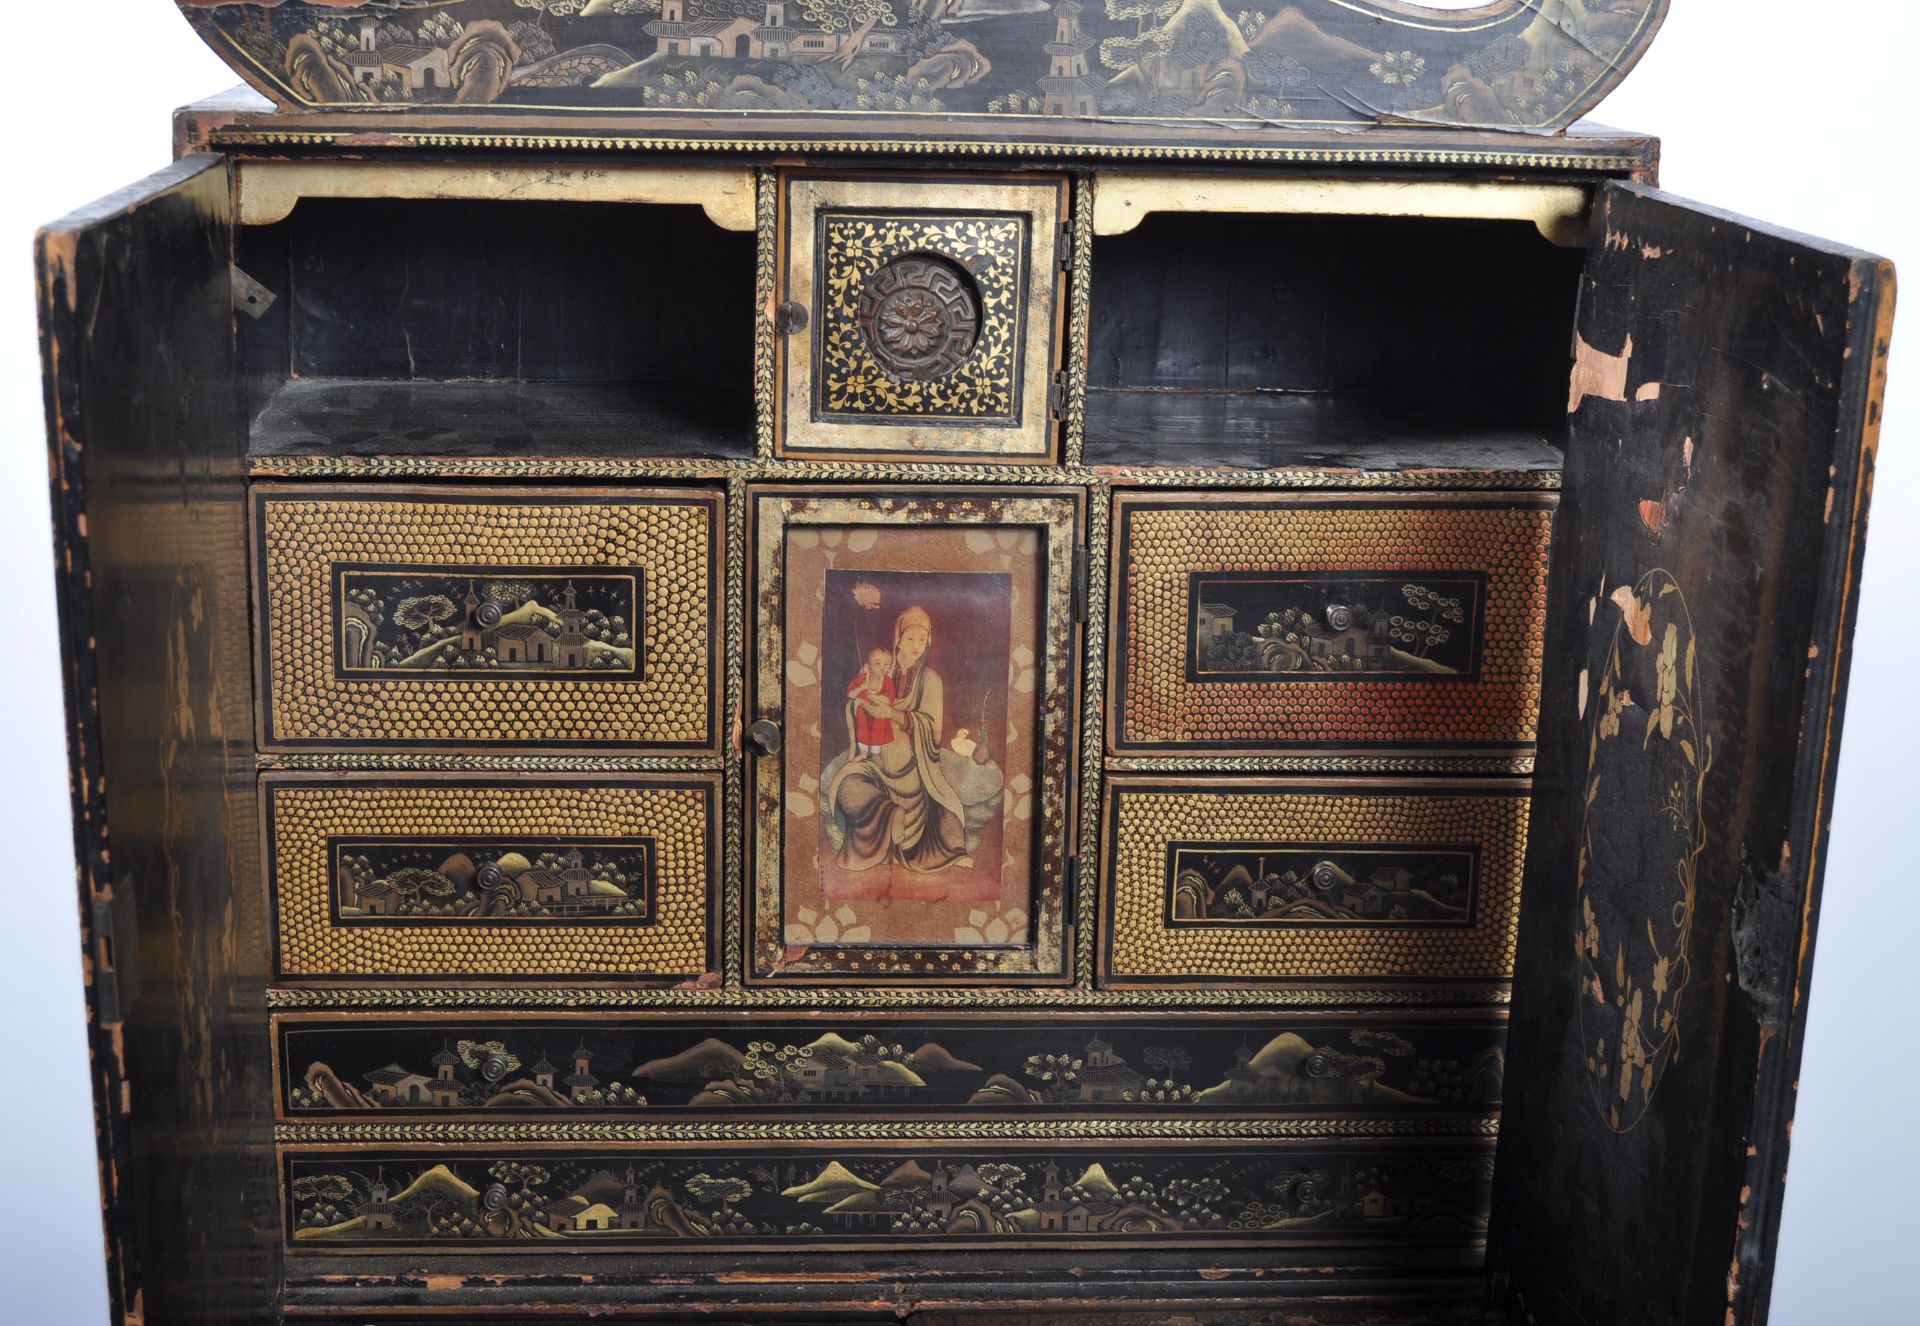 ANTIQUE 19TH CENTURY CHINESE BLACK LACQUER CHINOISERIE CABINET - Image 5 of 22